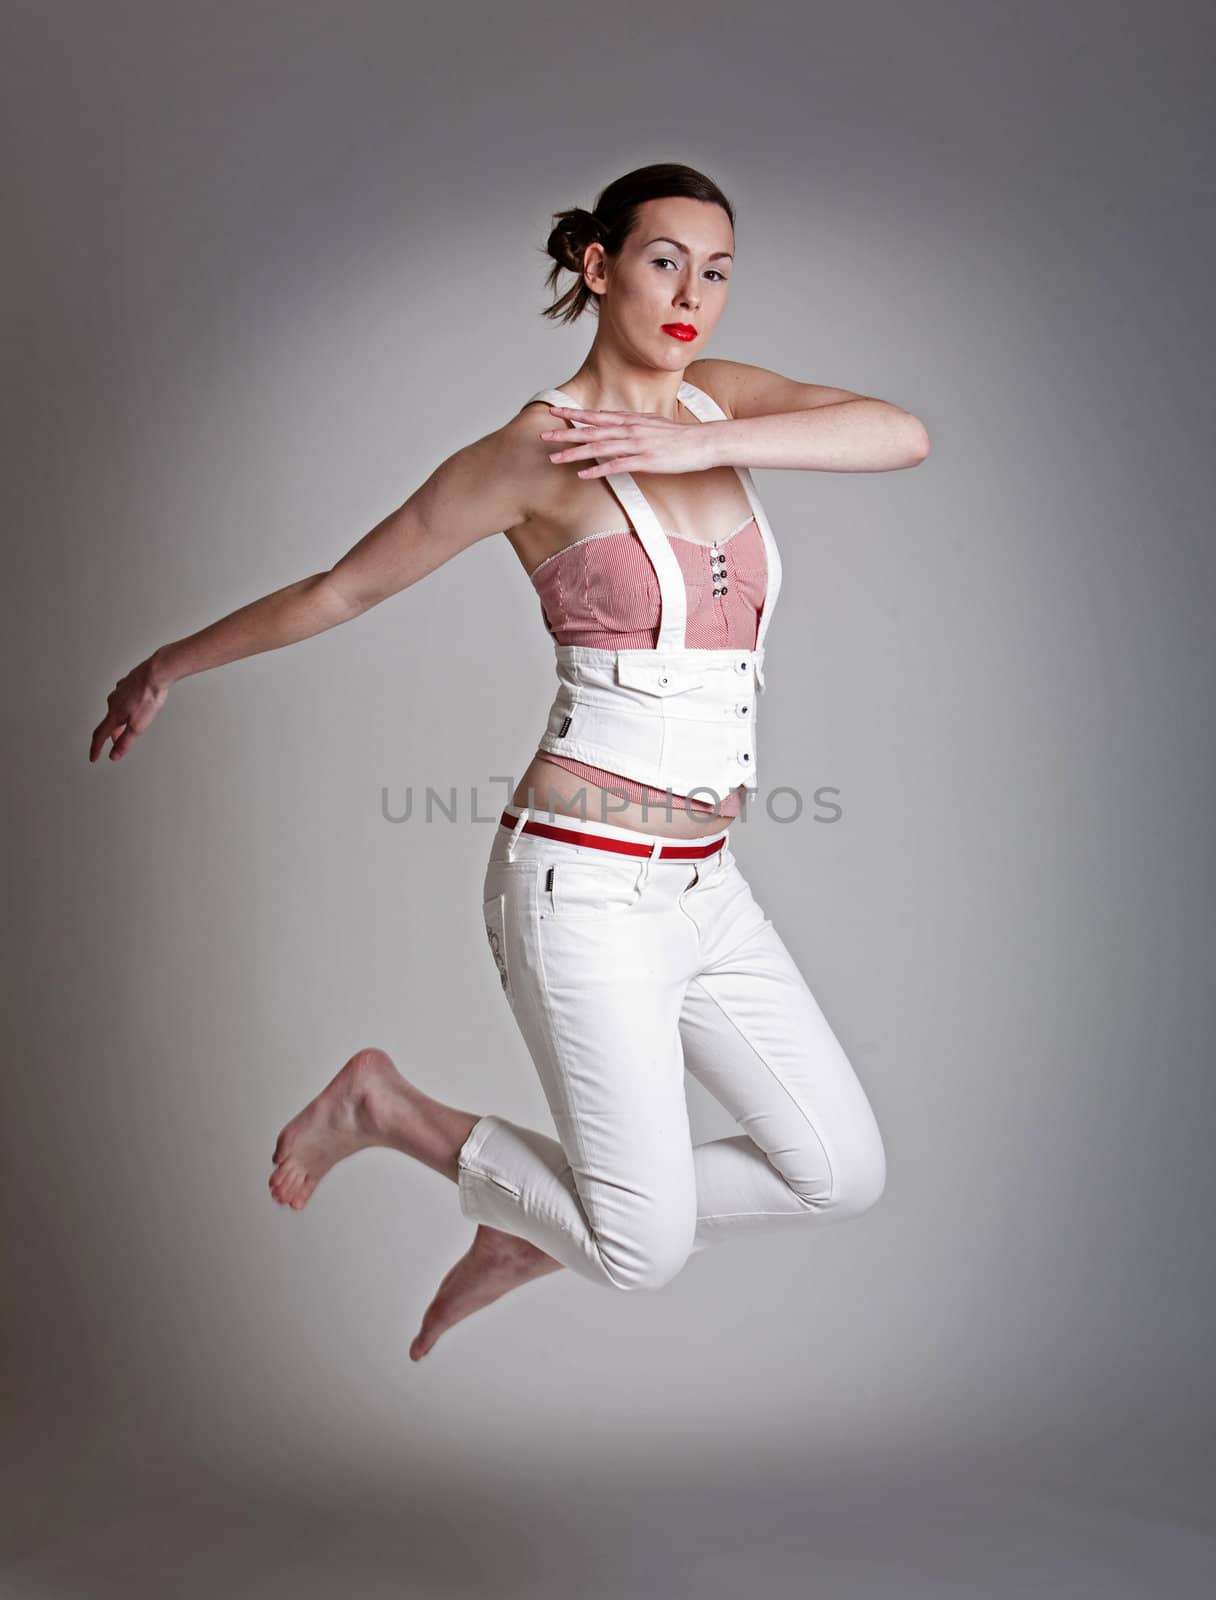 Beautiful woman in fashionable clothes jumping